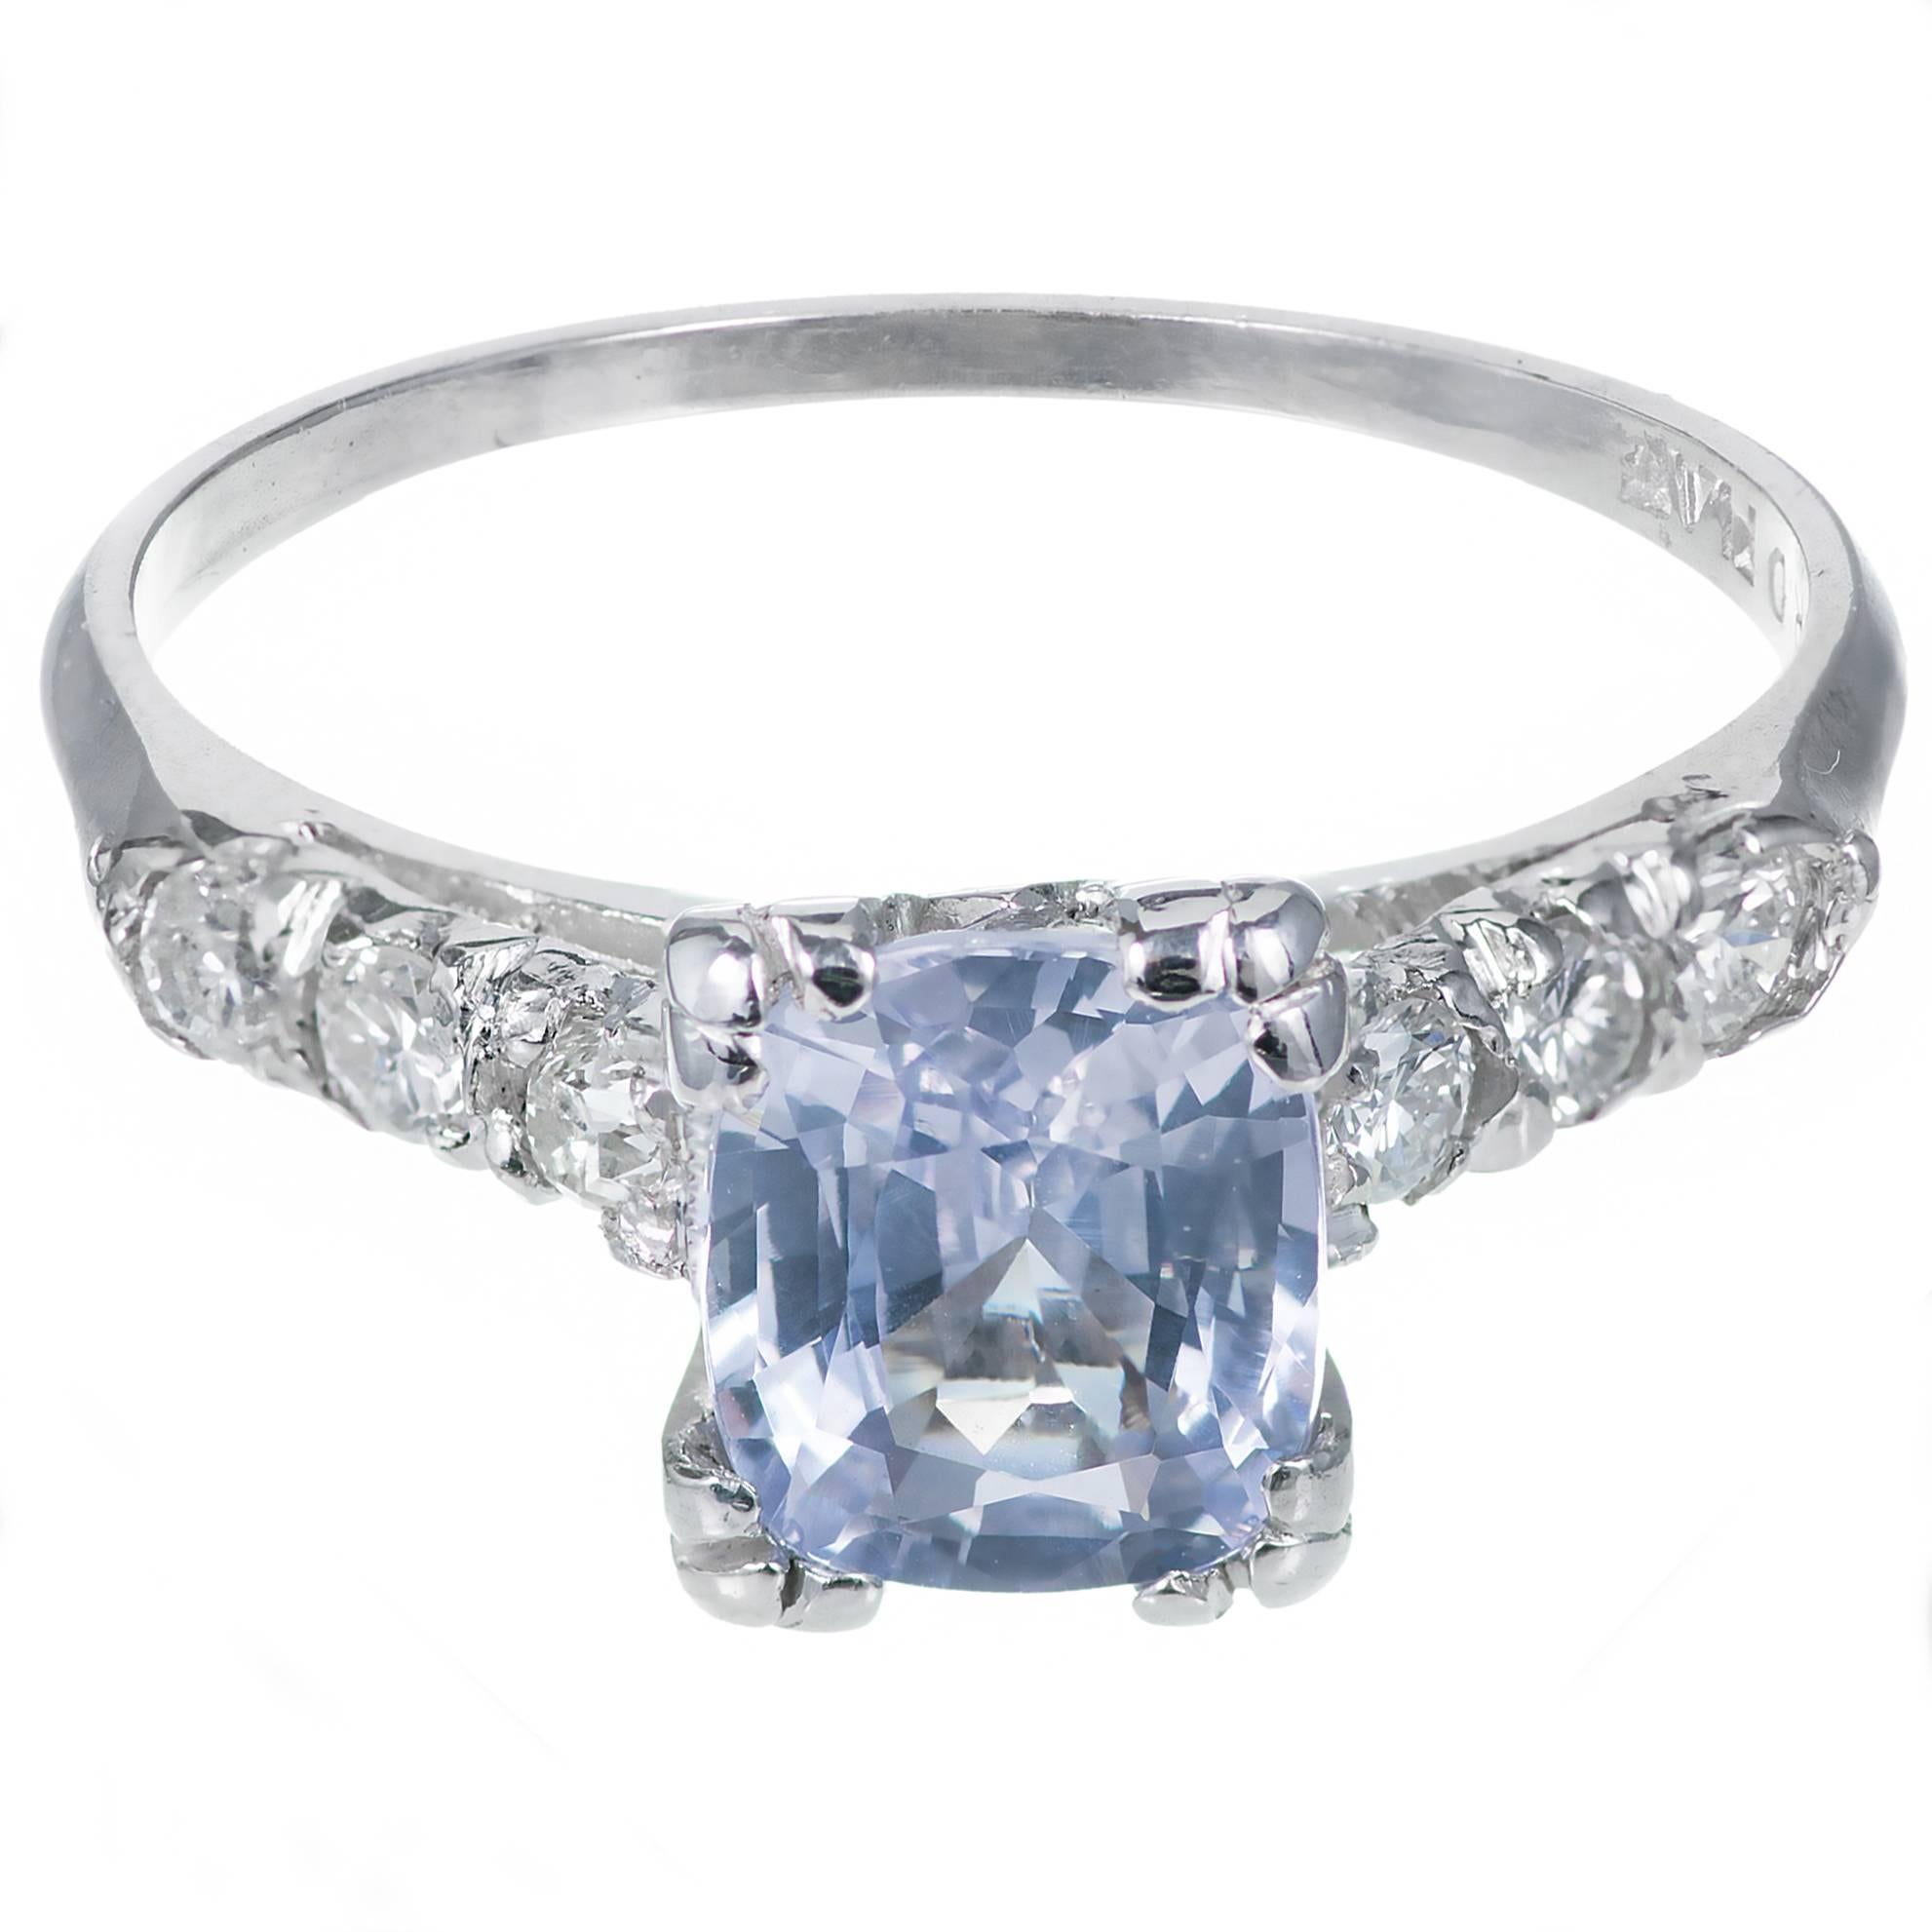 Natural GIA certified light violet Sapphire Platinum engagement ring, circa 1930 – 1940. Bright full cut side Diamonds. 

Platinum
1 cushion very light violet Sapphire, approx. total weight 1.45cts, VS, GIA certificate #5182148399
6 round full cut